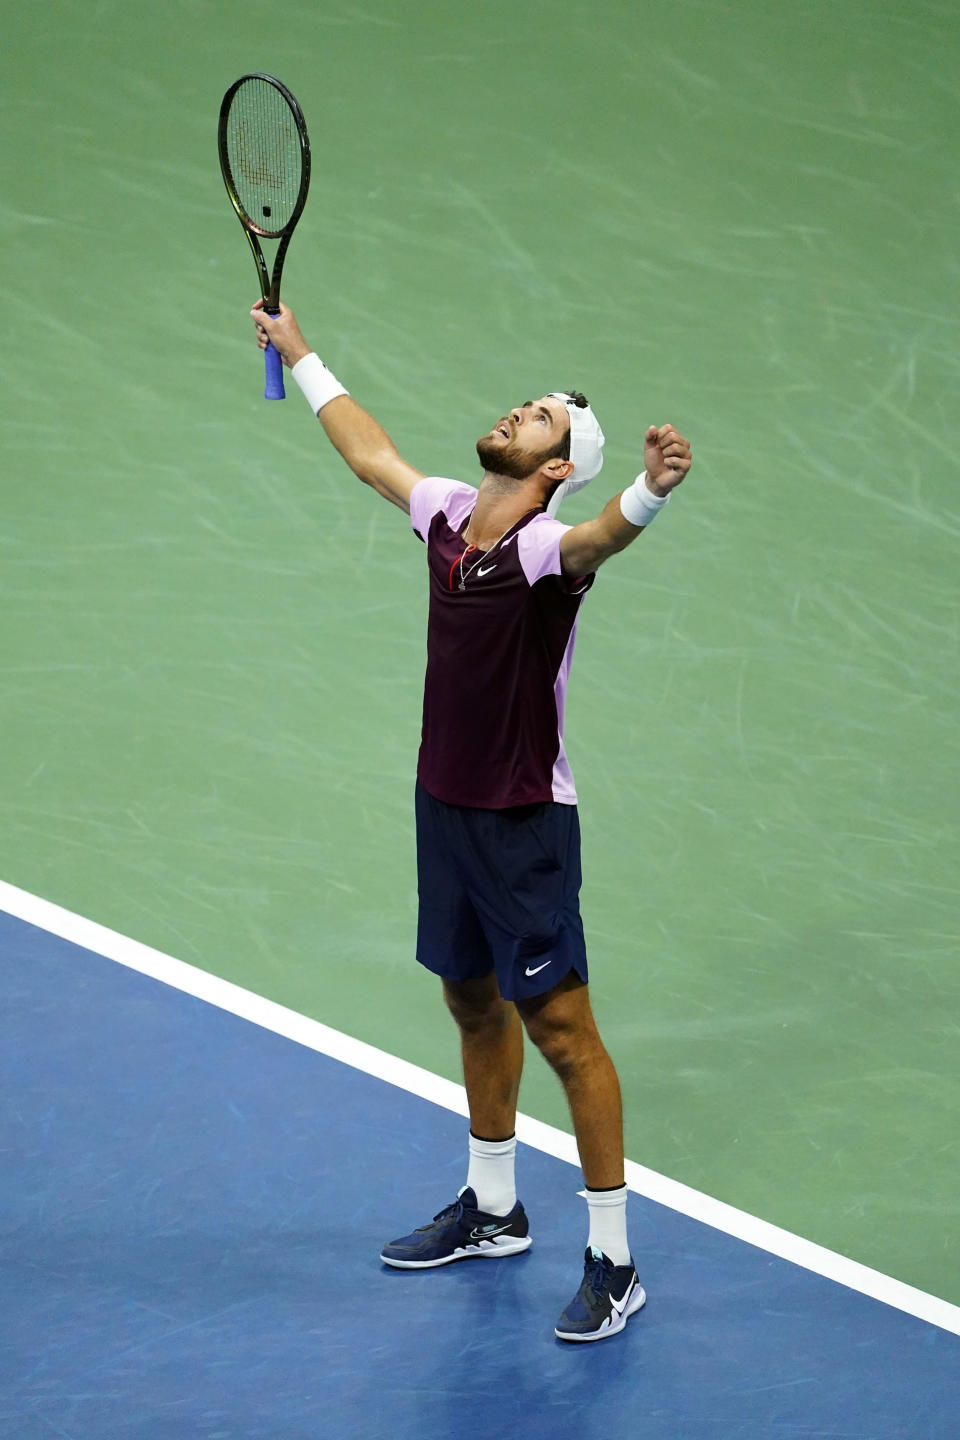 Karen Khachanov, of Russia, celebrates after defeating Nick Kyrgios, of Australia, during the quarterfinals of the U.S. Open tennis championships, Wednesday, Sept. 7, 2022, in New York. (AP Photo/Frank Franklin II)